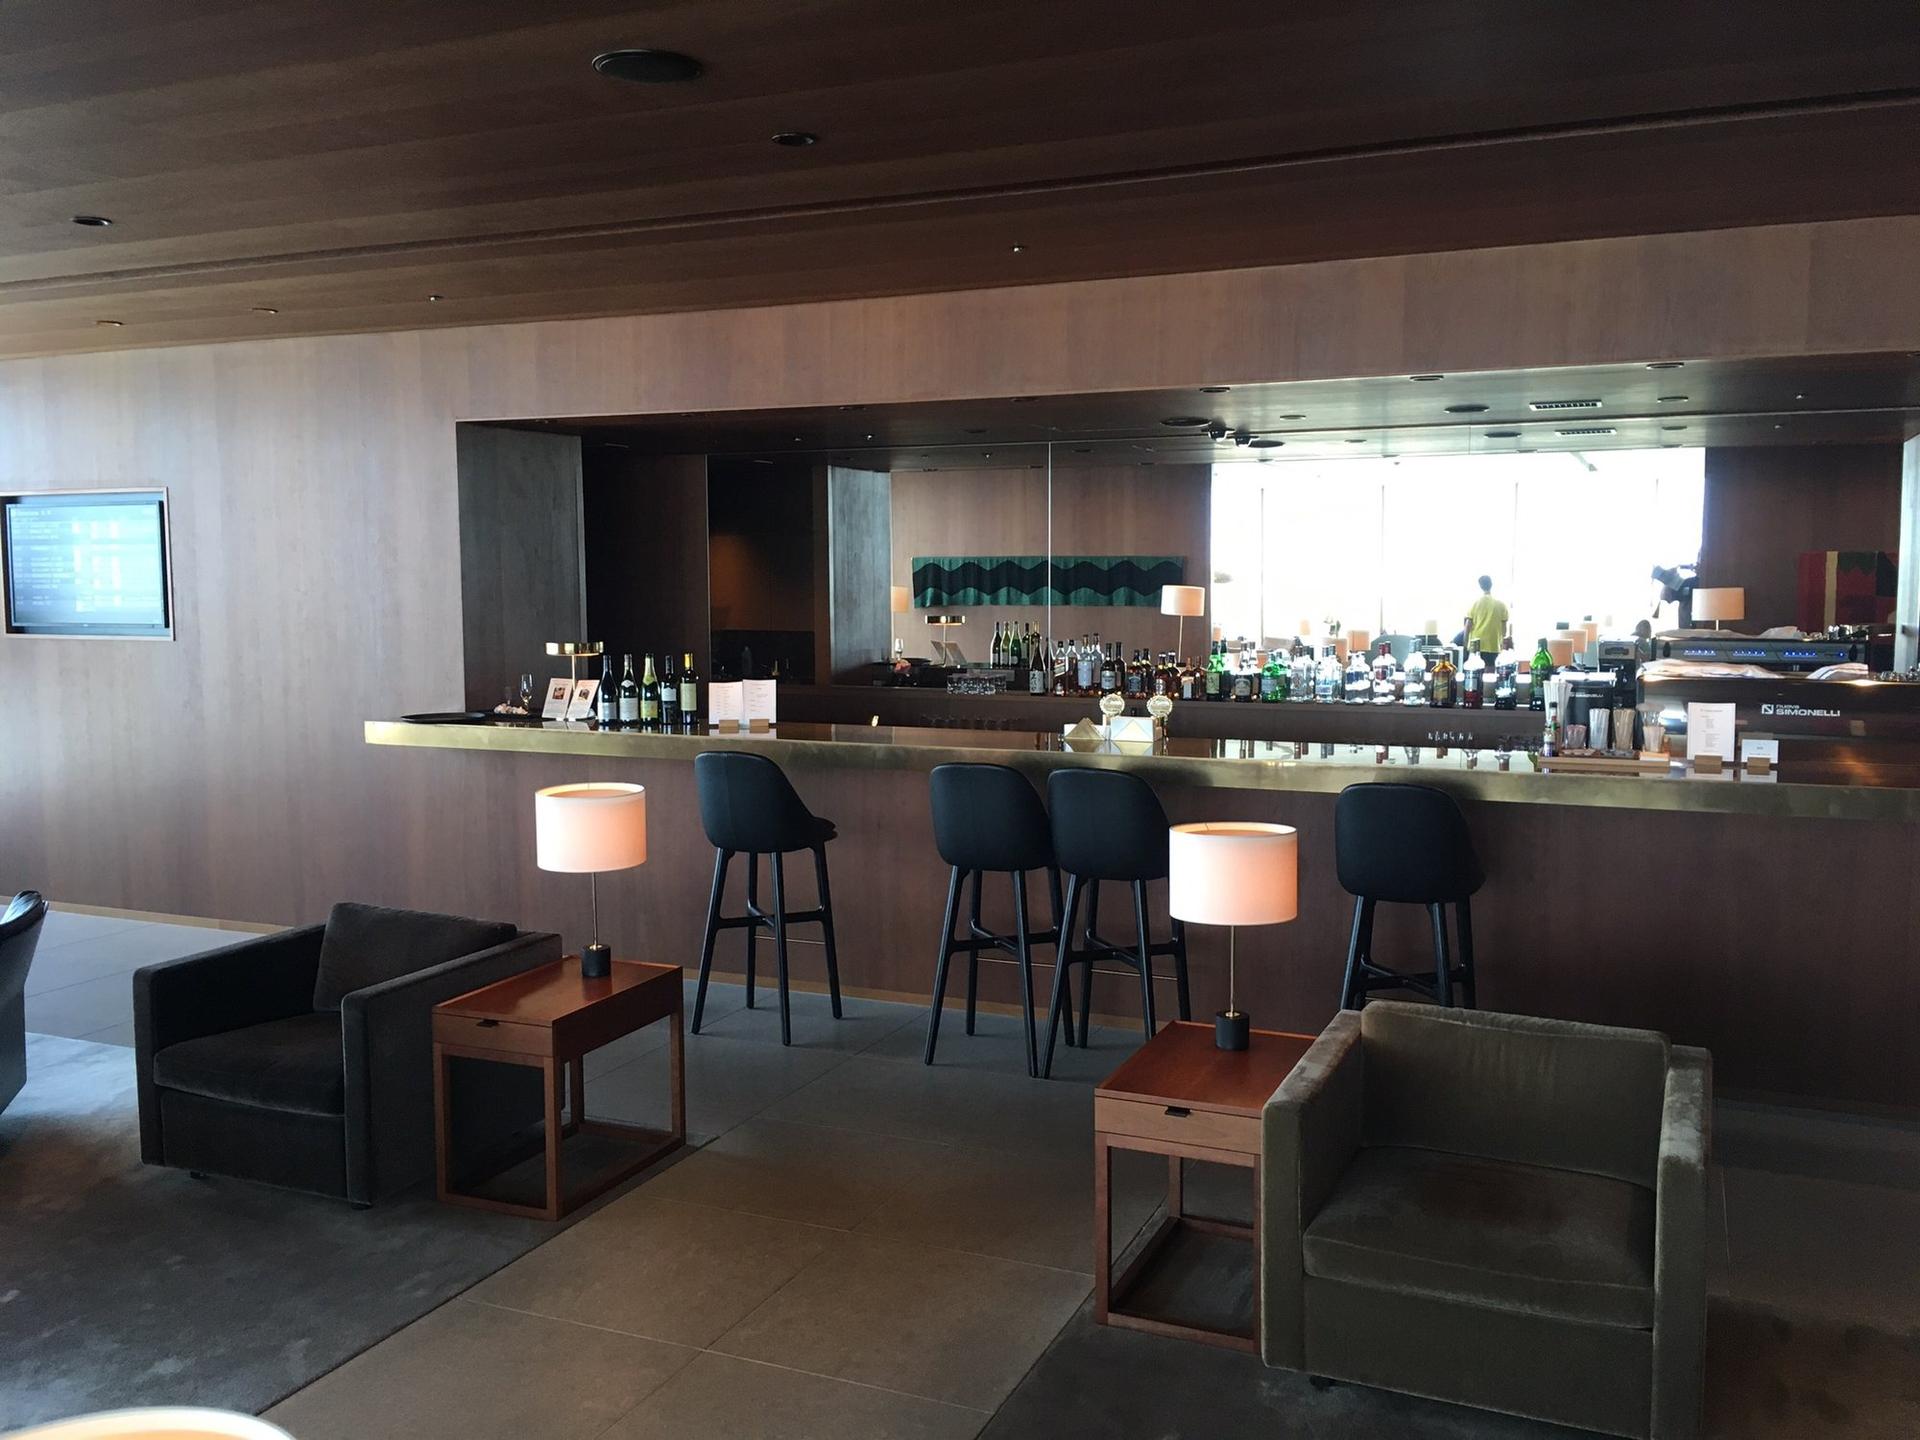 Cathay Pacific Lounge image 28 of 49